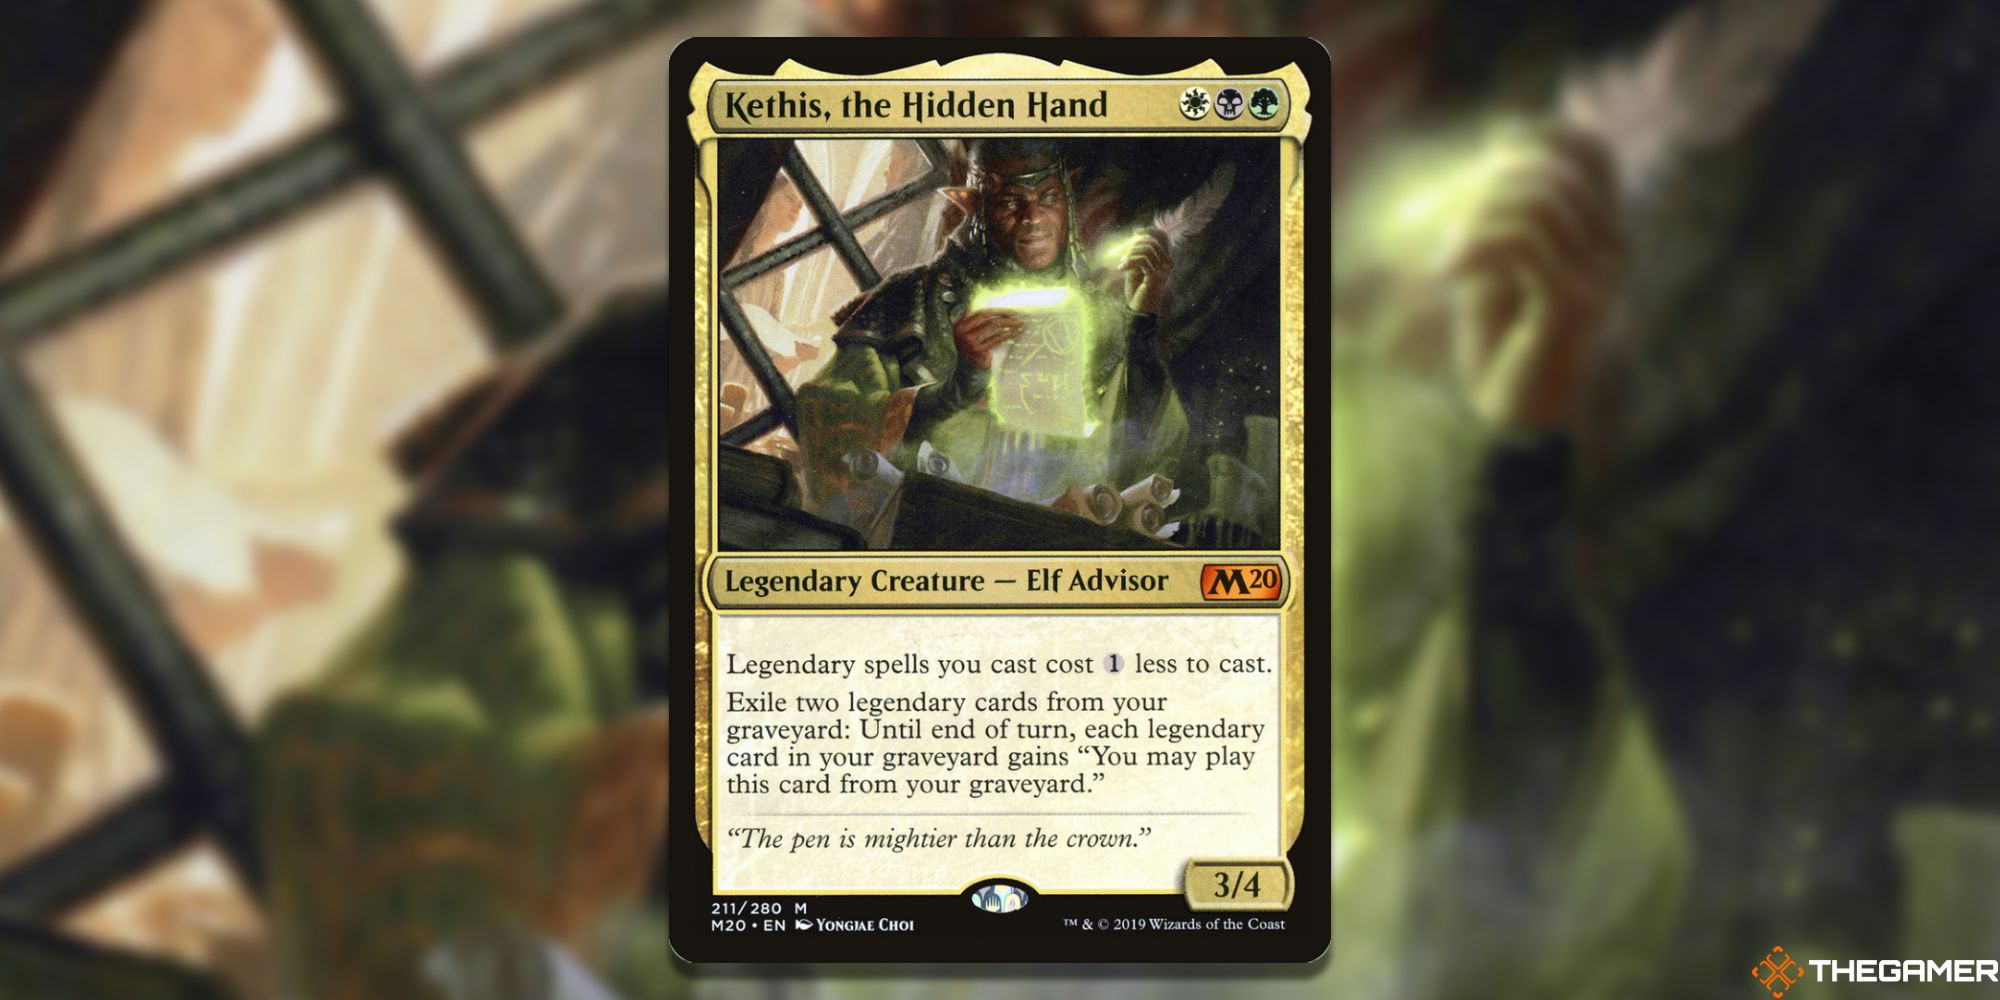 Image of the Kethis, the Hidden Hand card in Magic: The Gathering, with art by Yongjae Choi